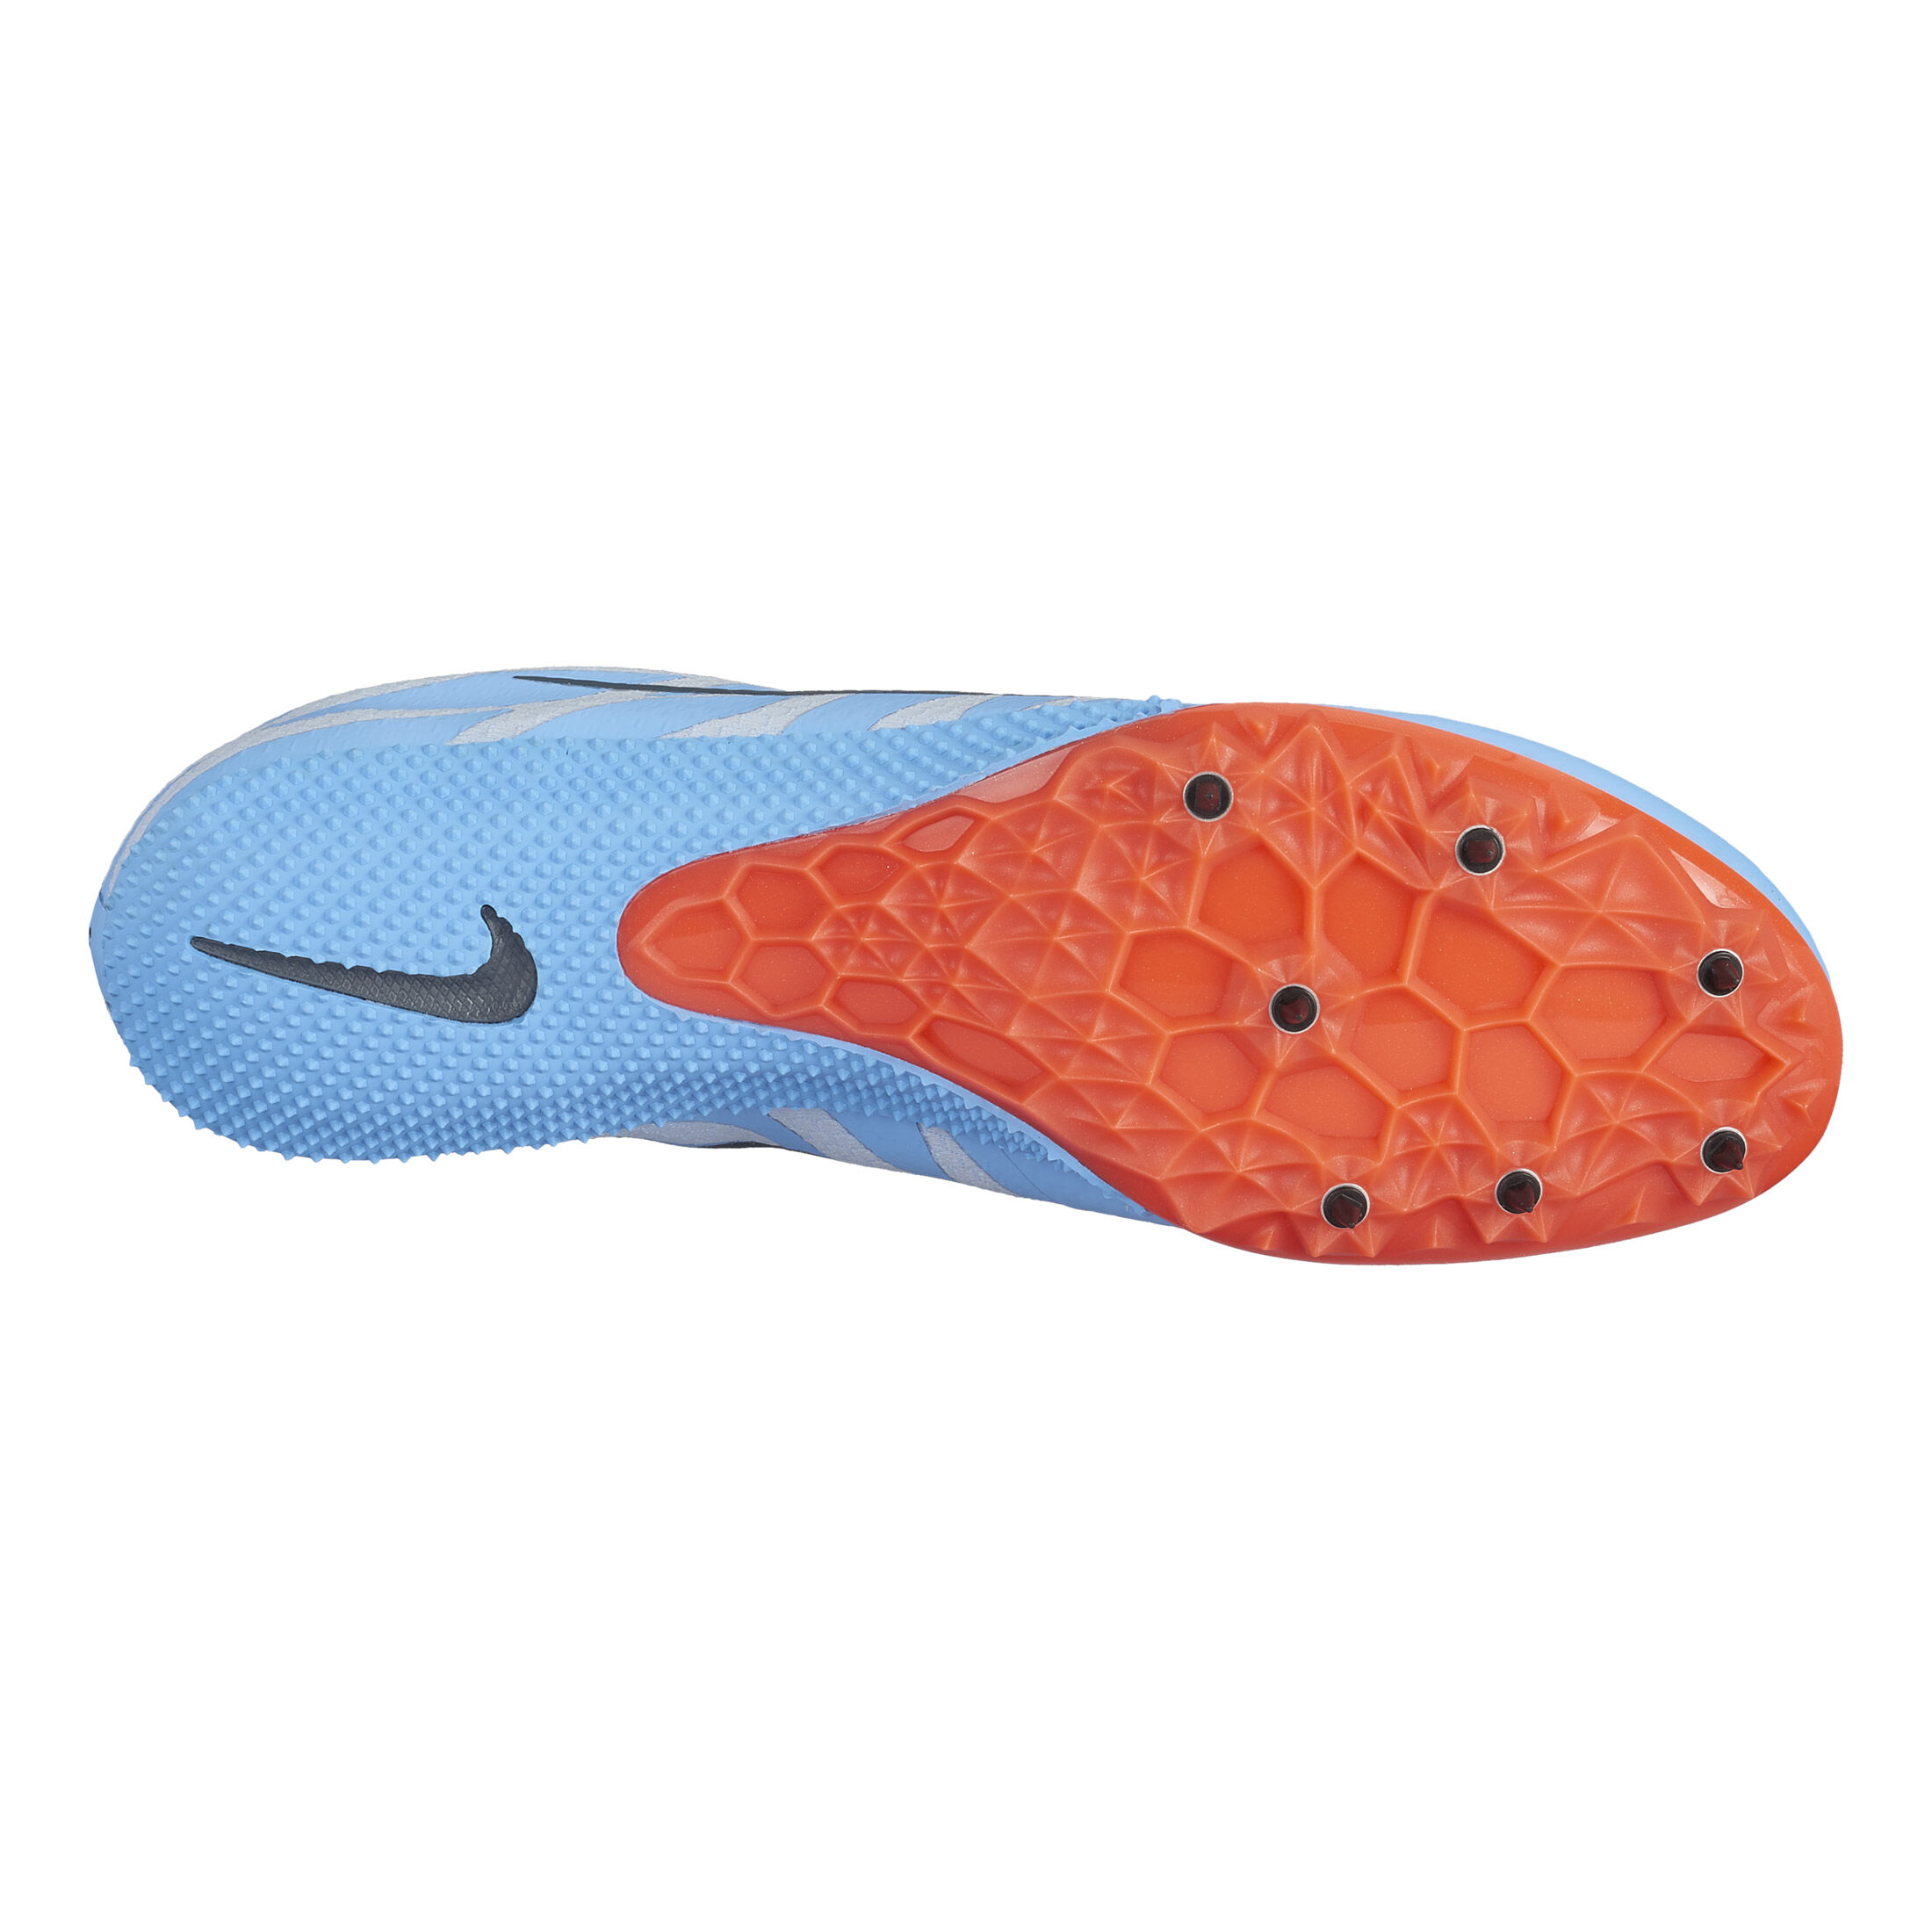 nike zoom rival s 9 blue